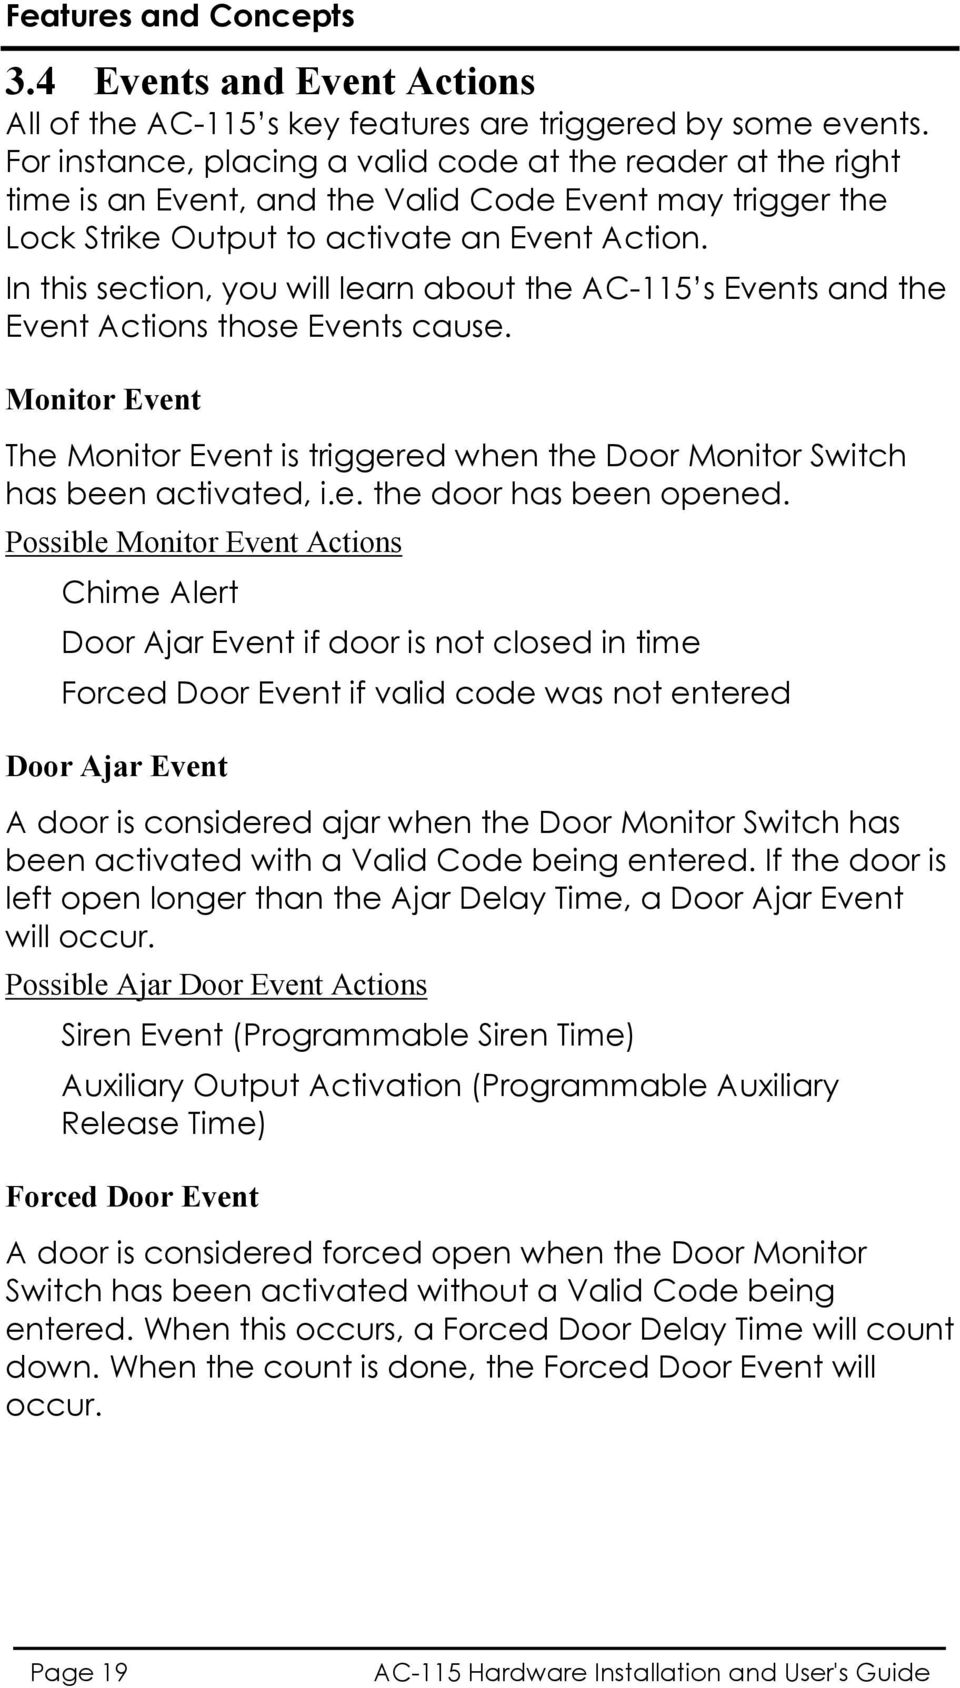 In this section, you will learn about the AC-115 s Events and the Event Actions those Events cause. Monitor Event The Monitor Event is triggered when the Monitor Switch has been activated, i.e. the door has been opened.